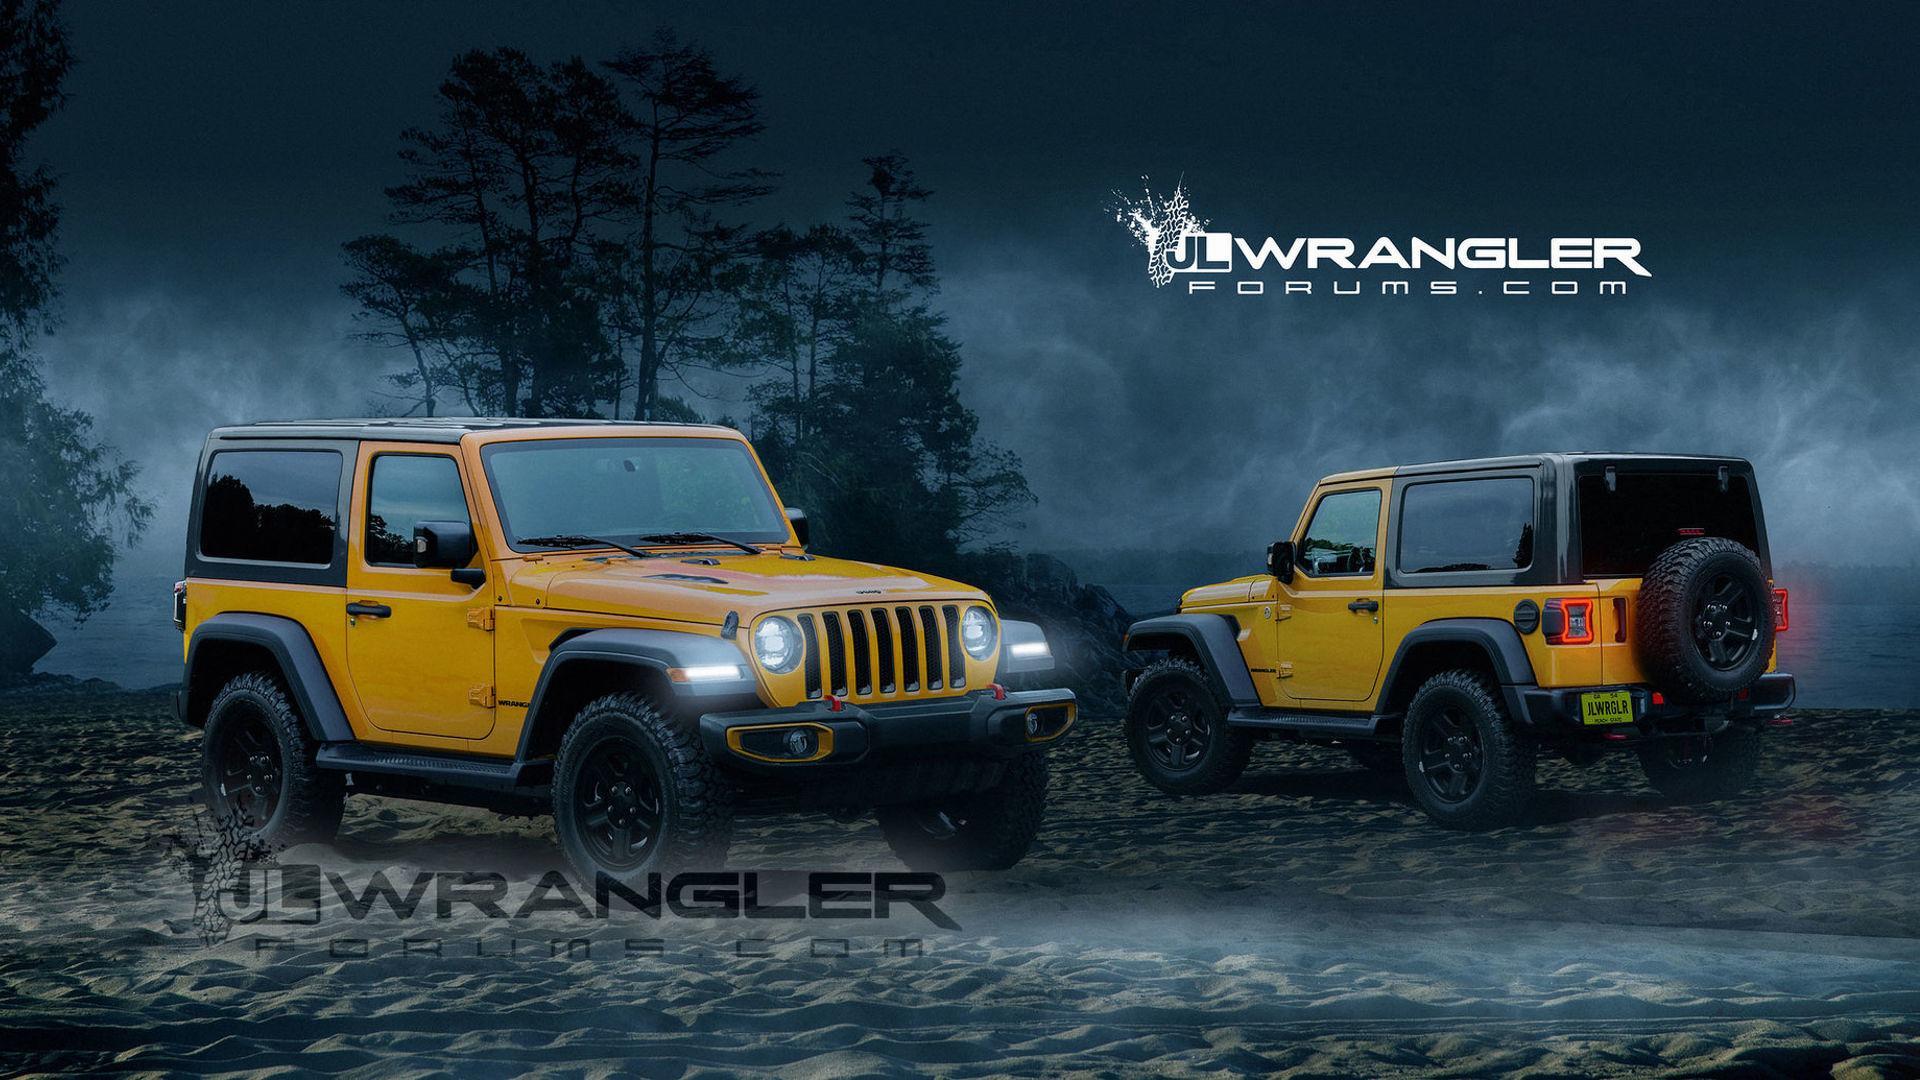 Jeep Wrangler Two Door Rendered With New Cues